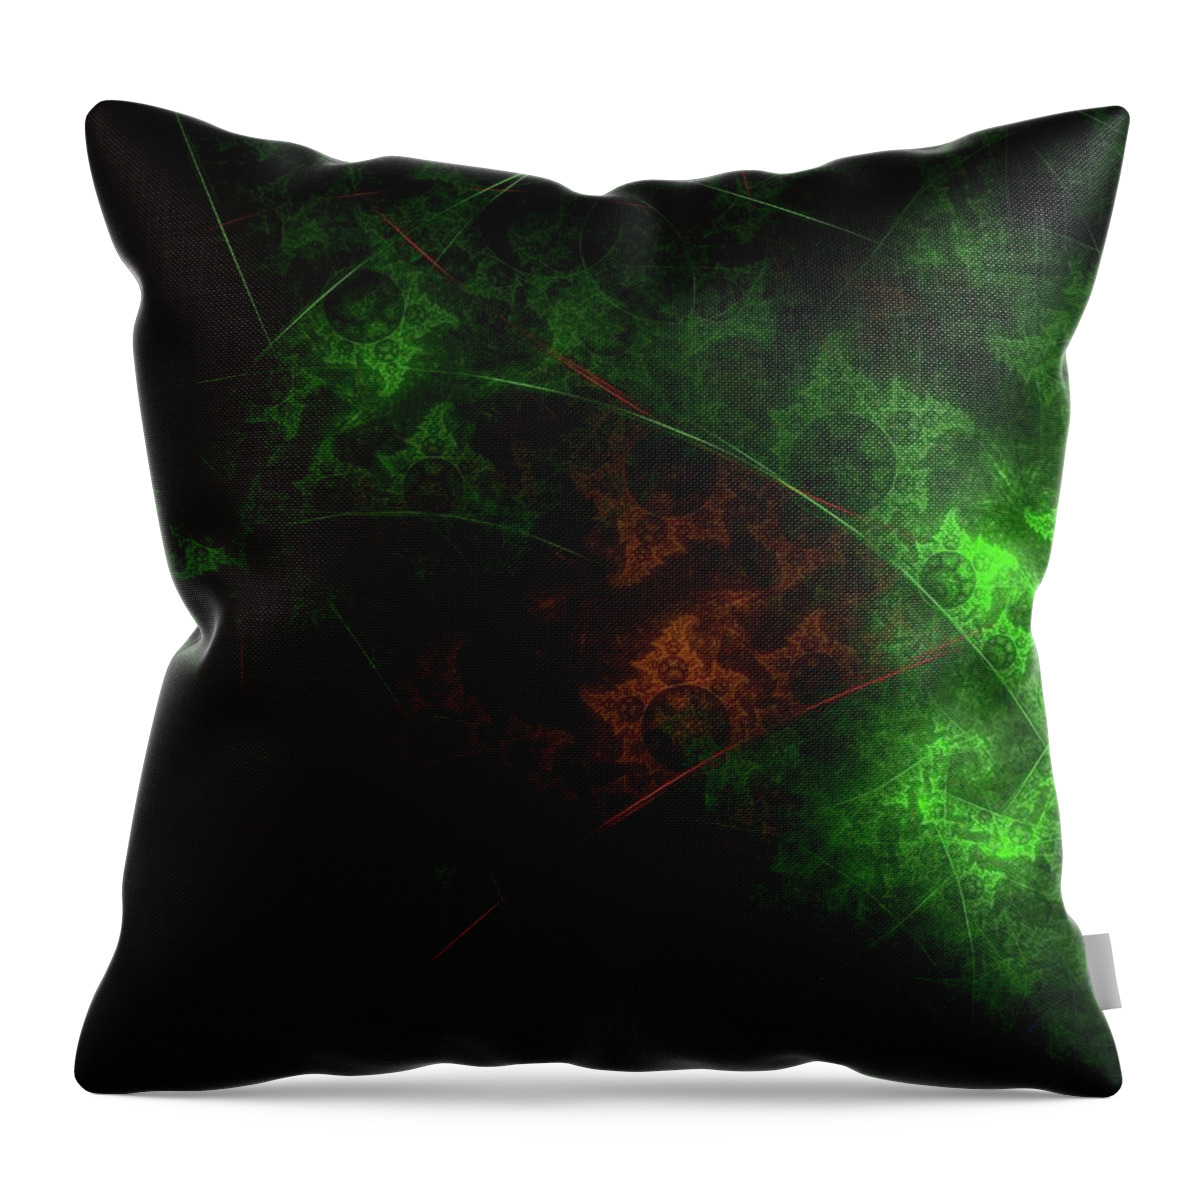 Home Throw Pillow featuring the digital art Cures for Broken Hearts by Jeff Iverson